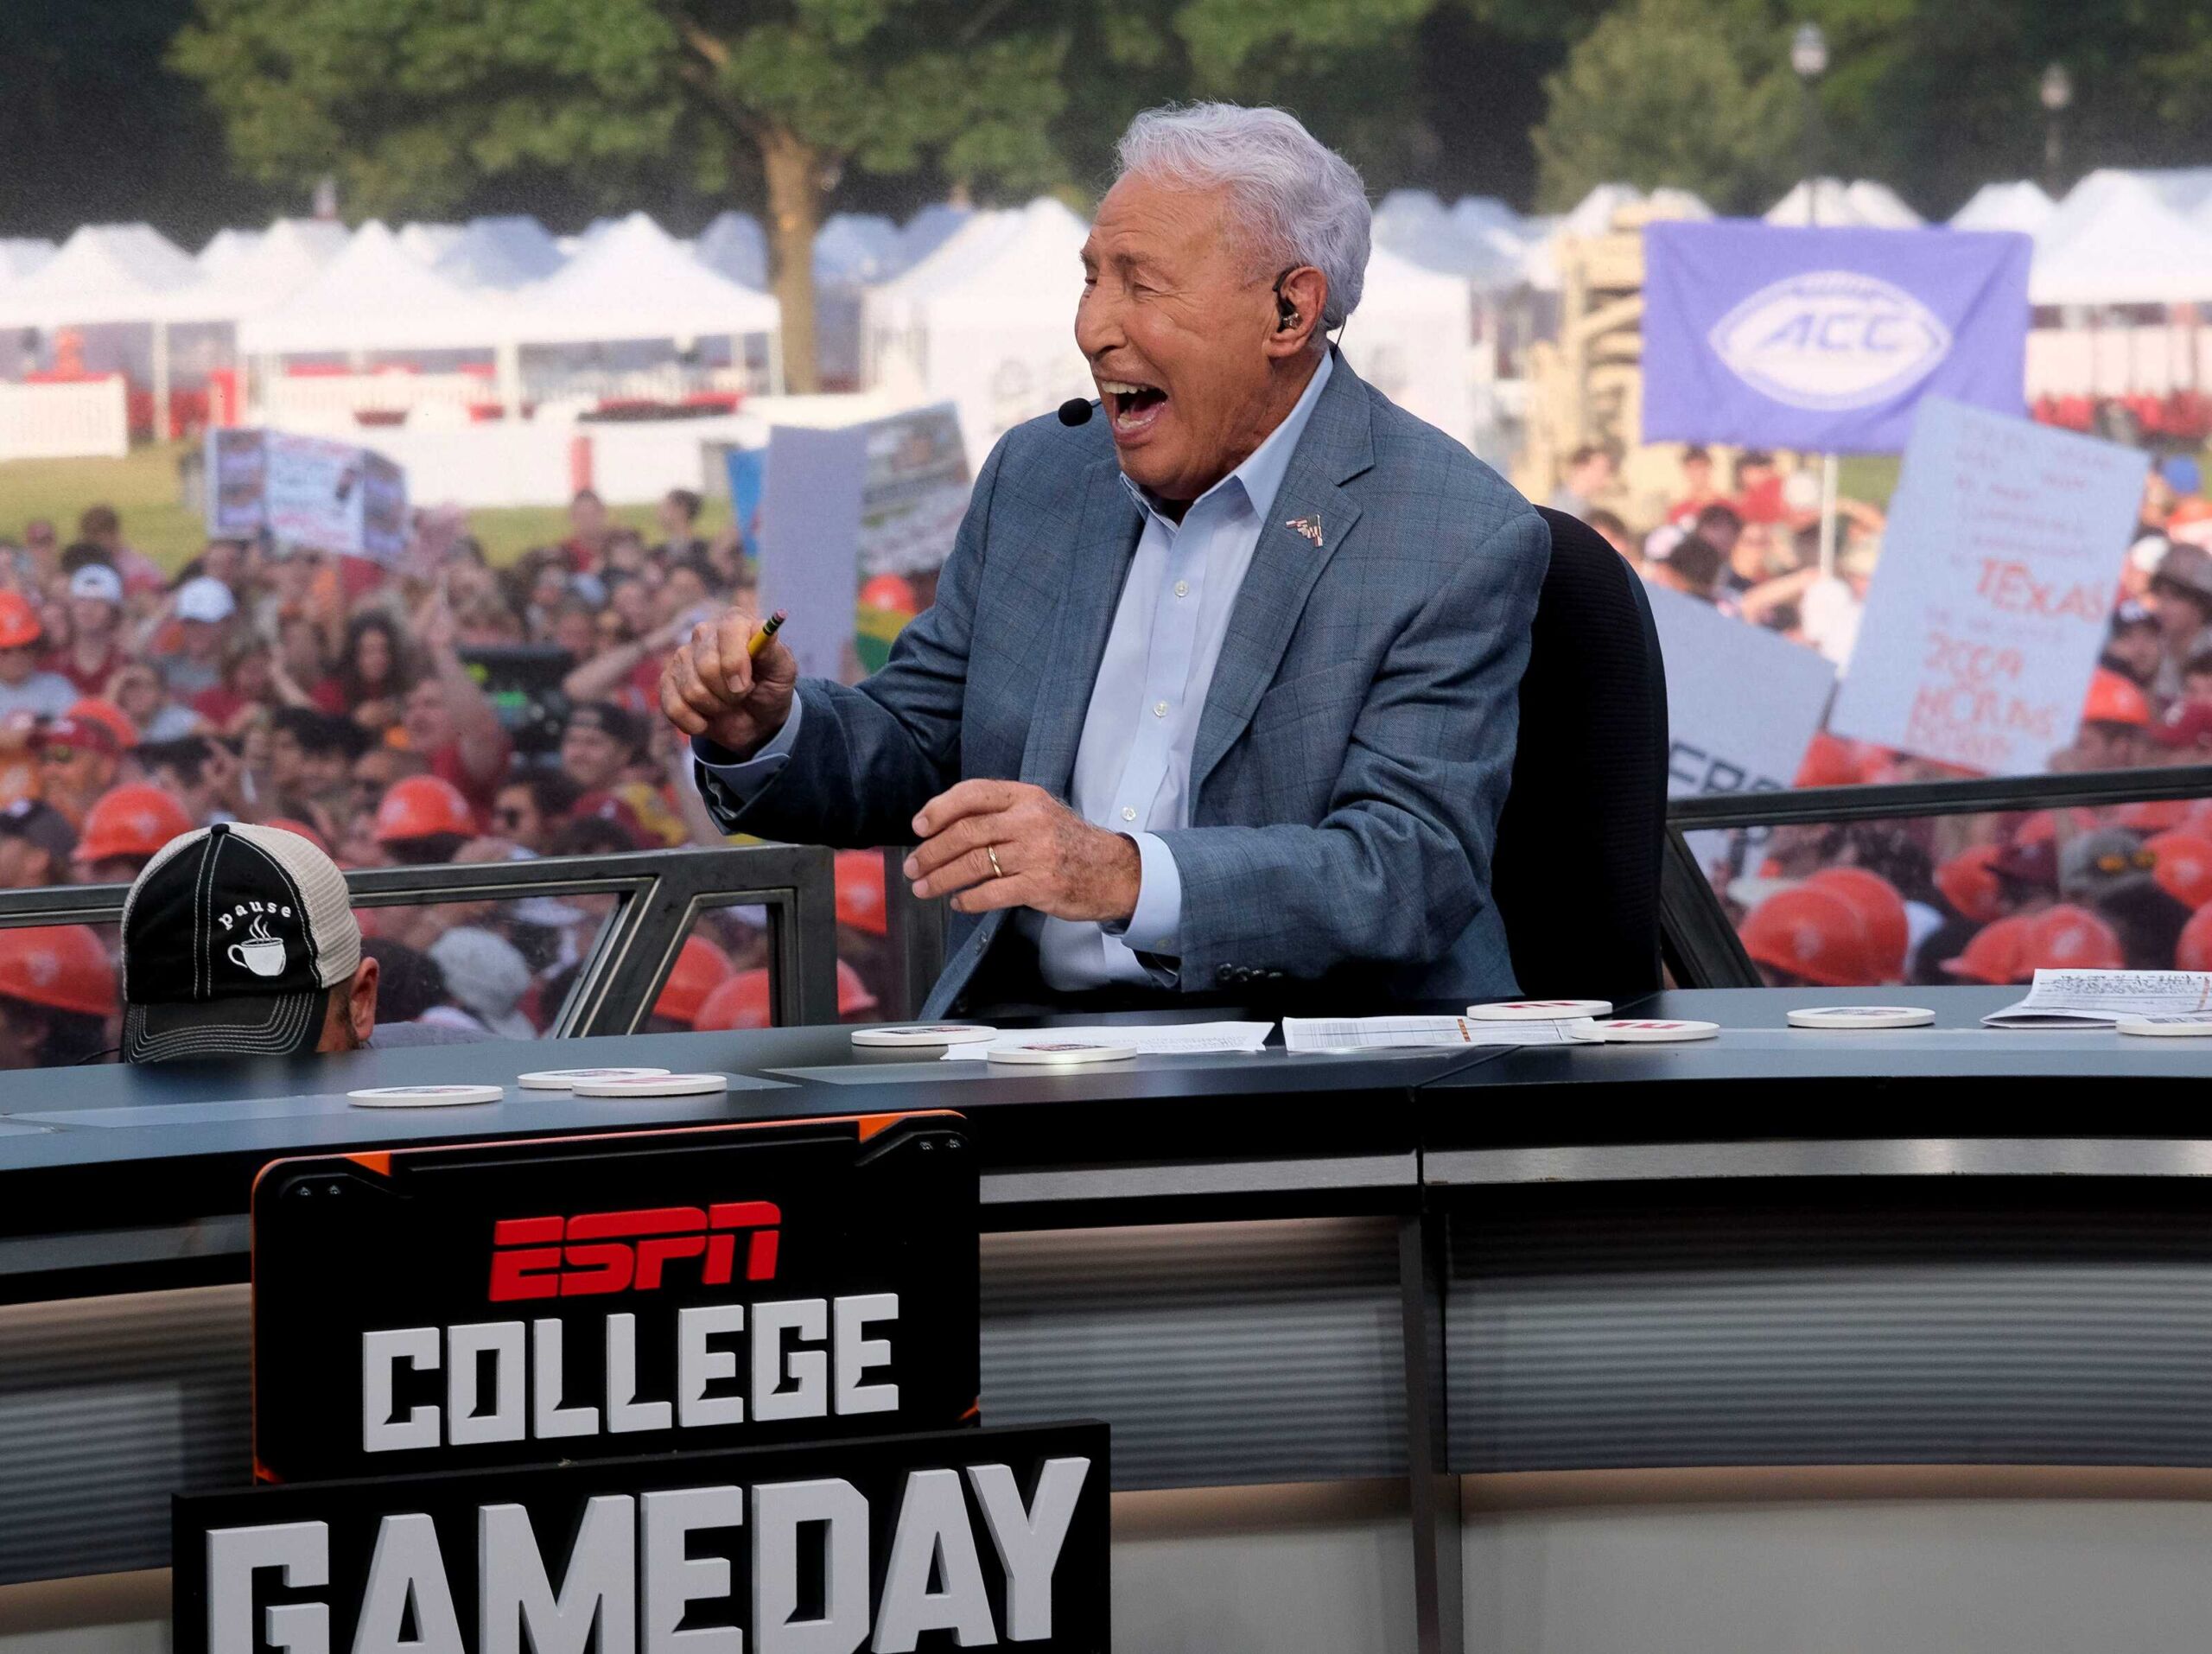 Who did Lee Corso pick today? Week 2 College Gameday headgear choice